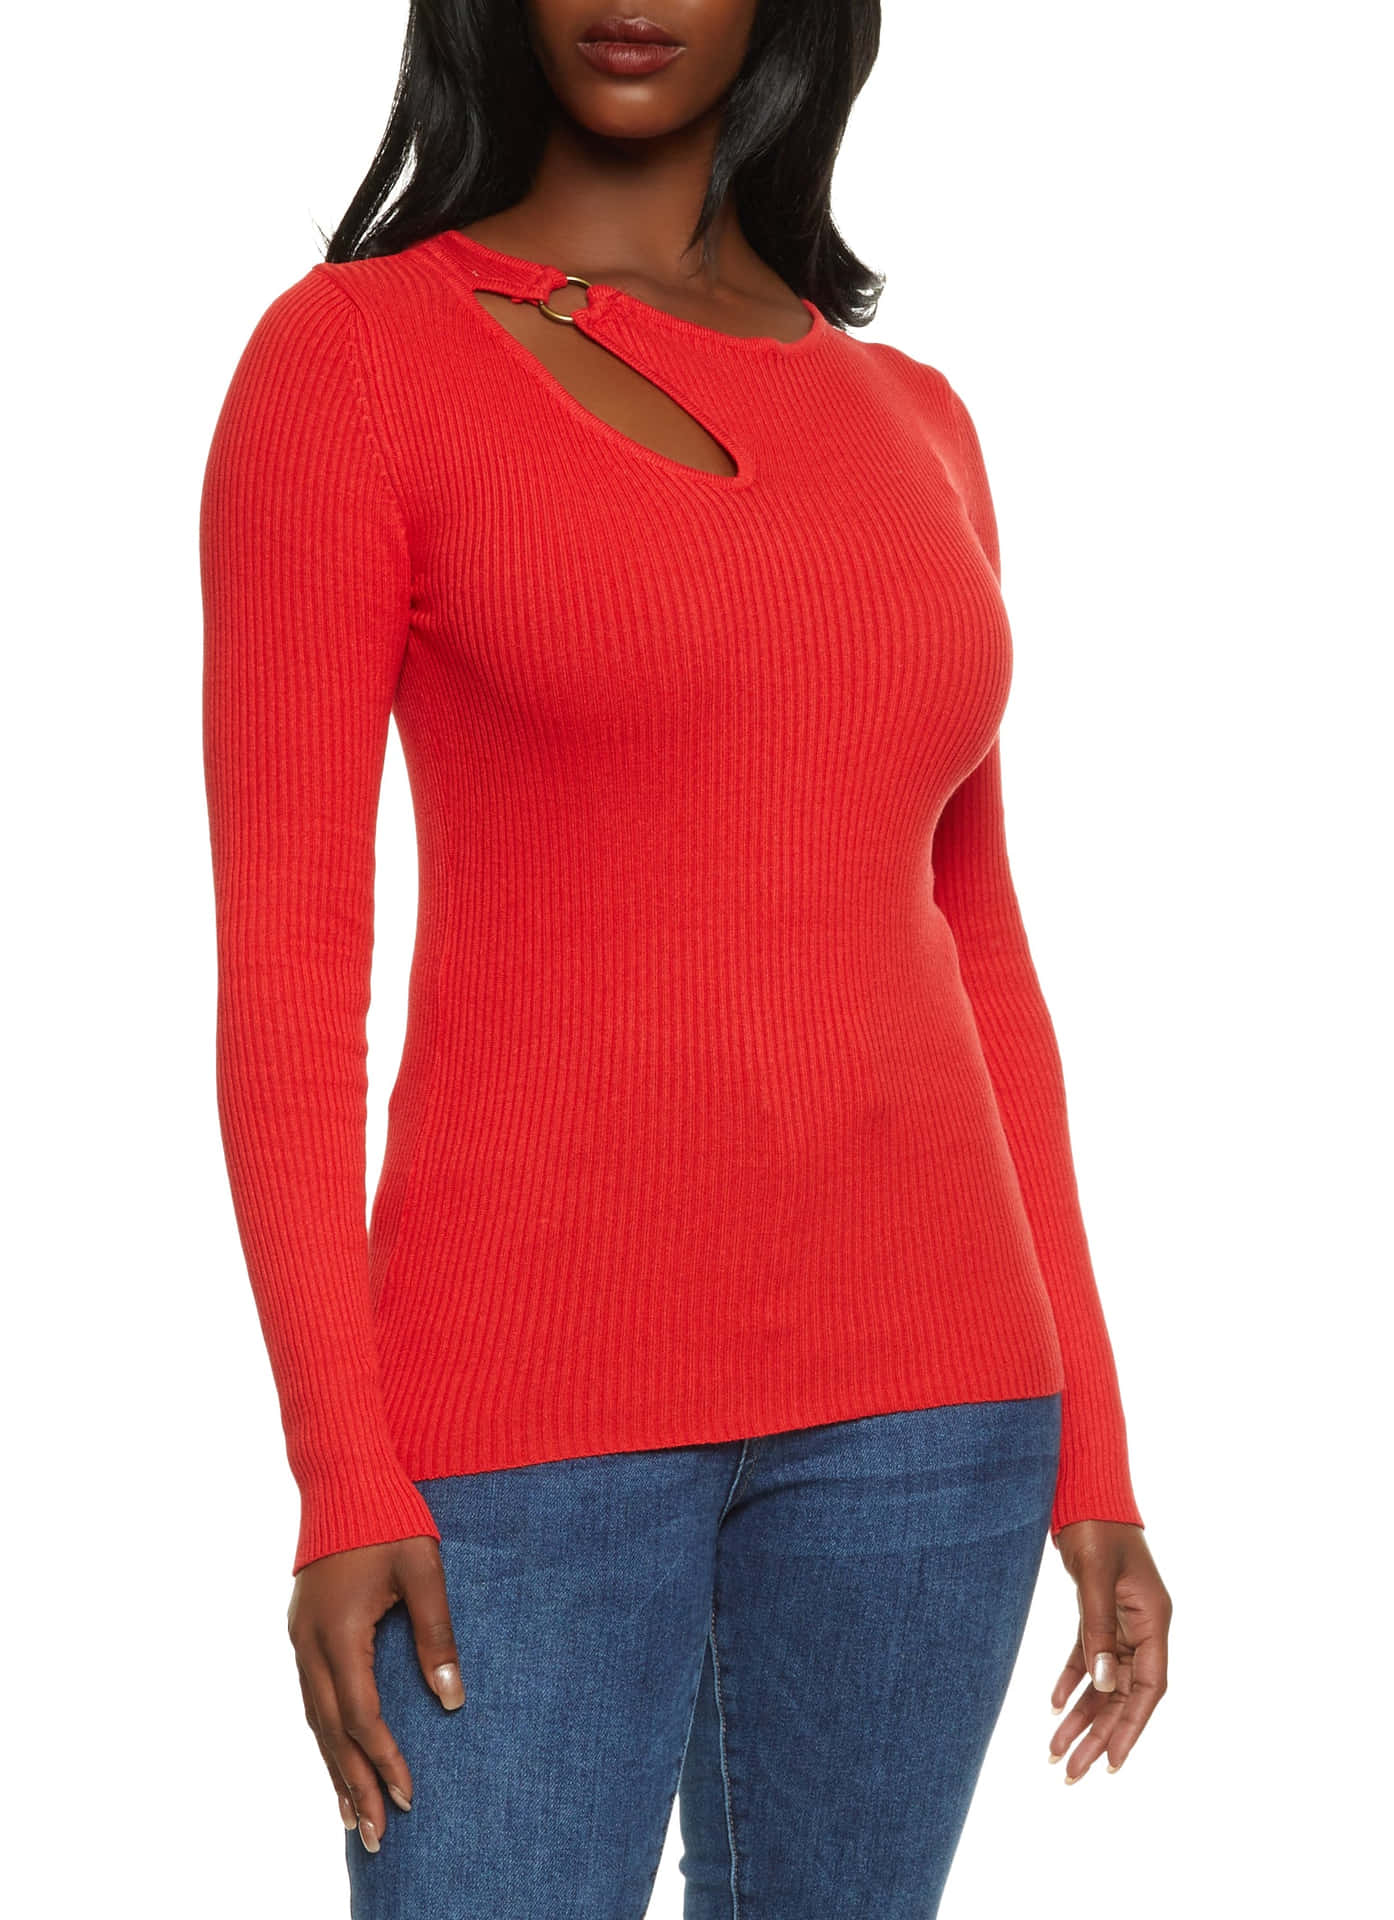 Woman in a stylish red sweater Wallpaper